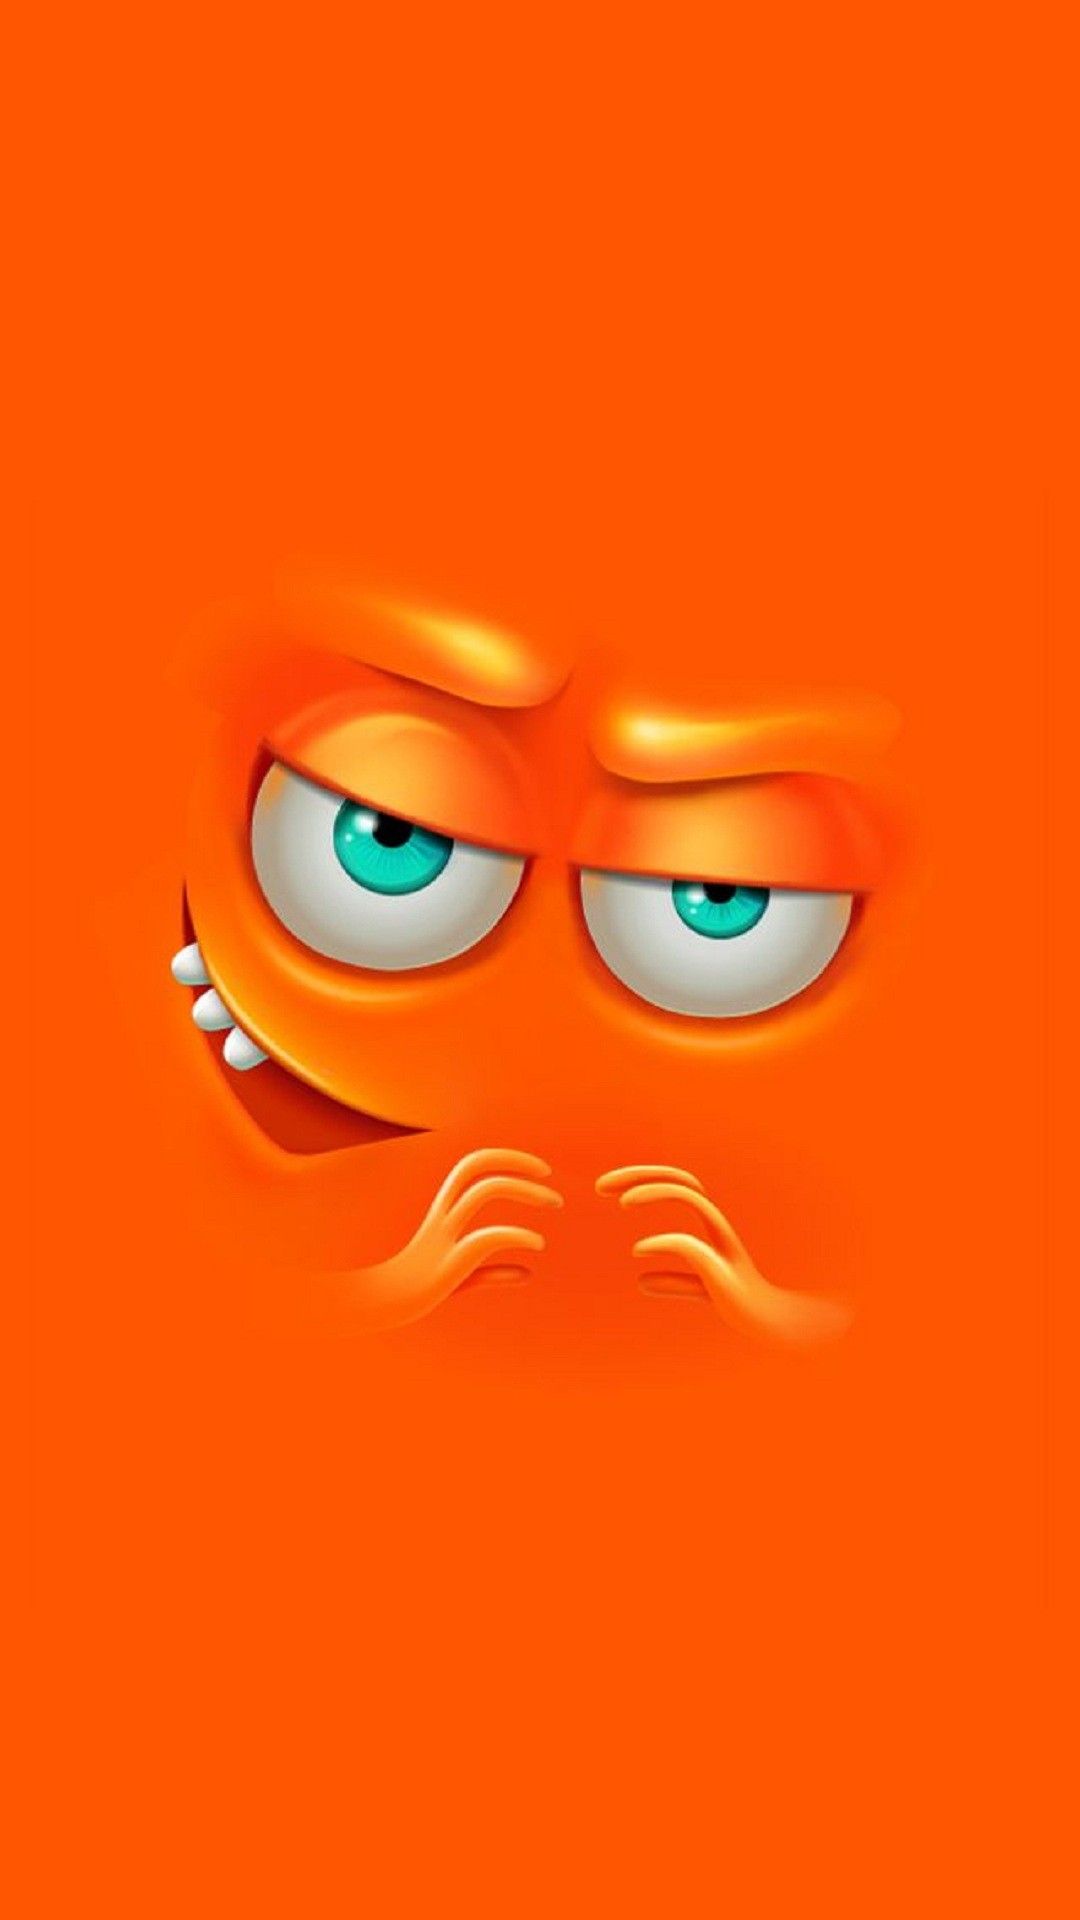 Wallpapers, Abstract, Minimal, Funny, Vector Orange Faces, Free 